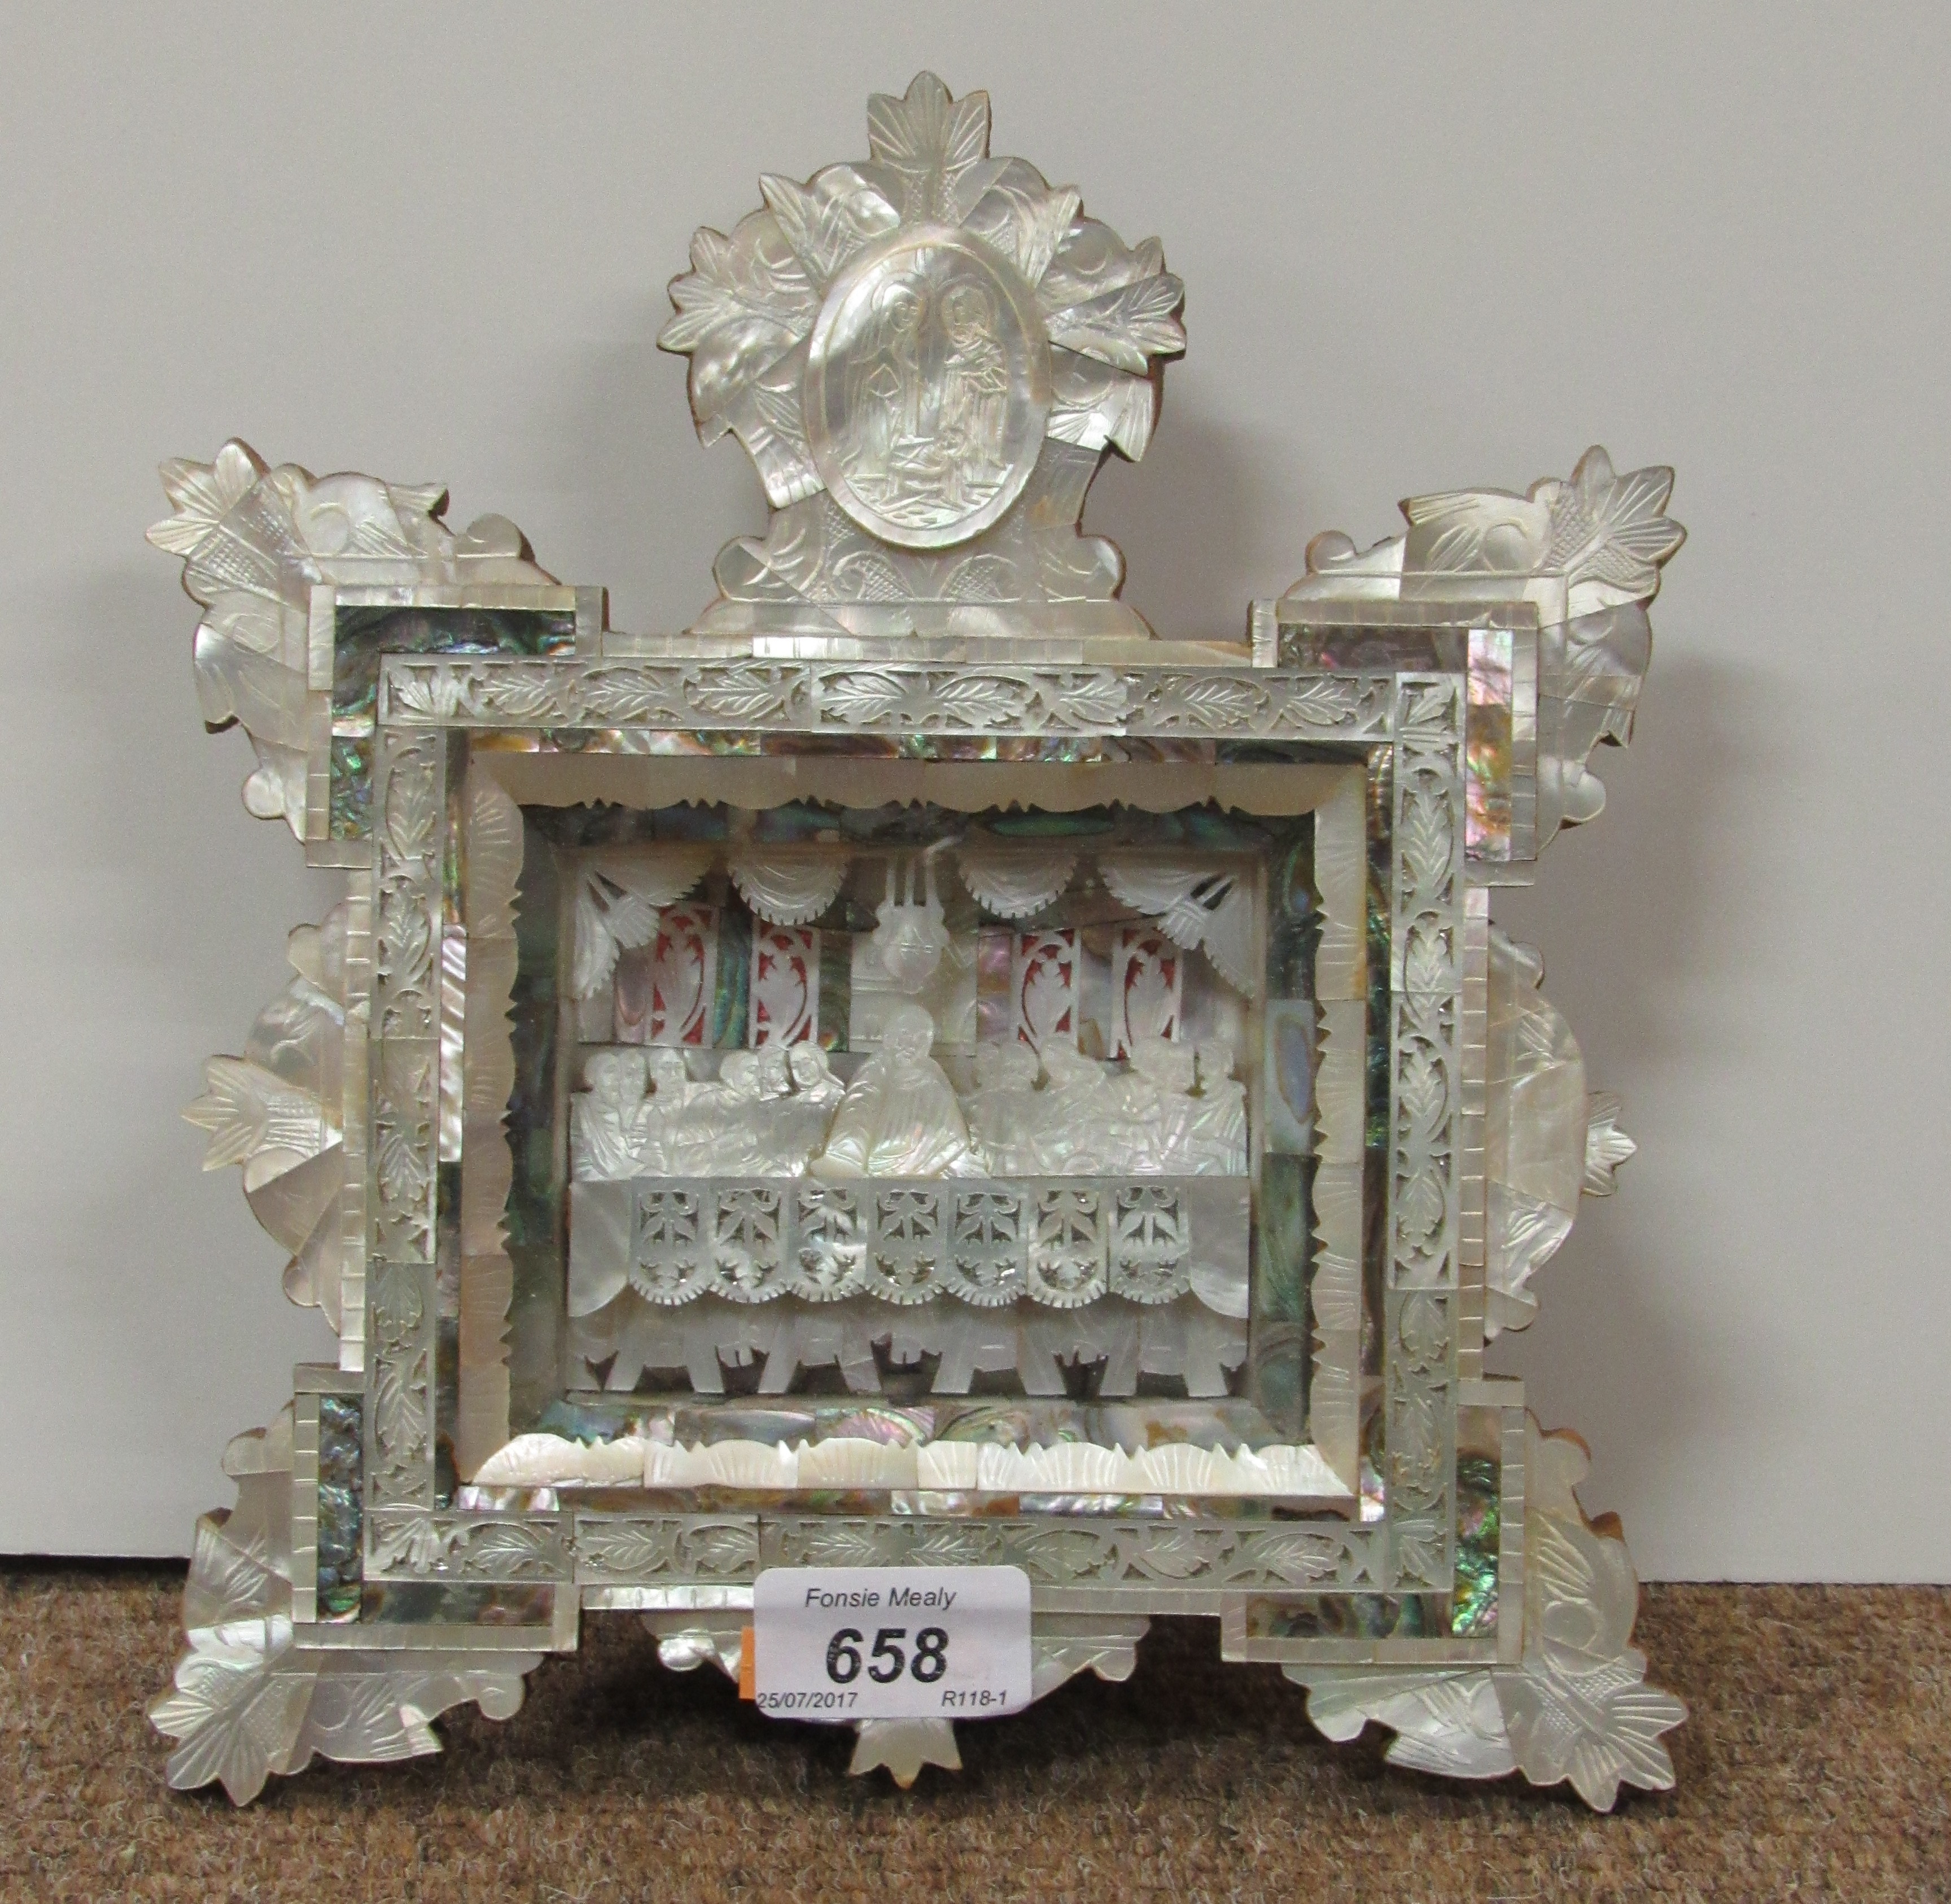 A rare and unusual Continental mother-o-pearl diorama depicting The Last Supper,